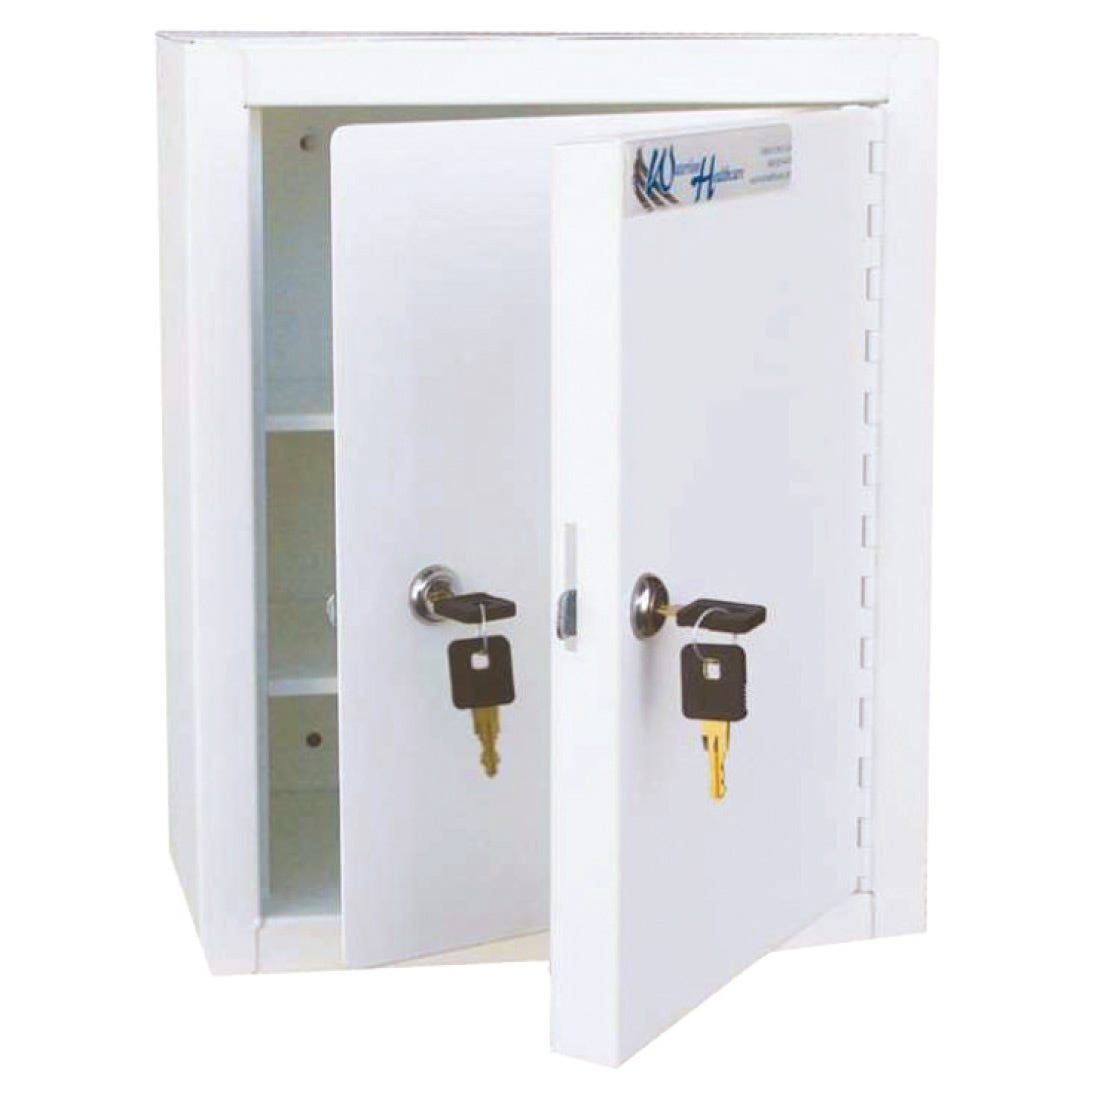 Narcotic Safe - Double Door and 2 Locks